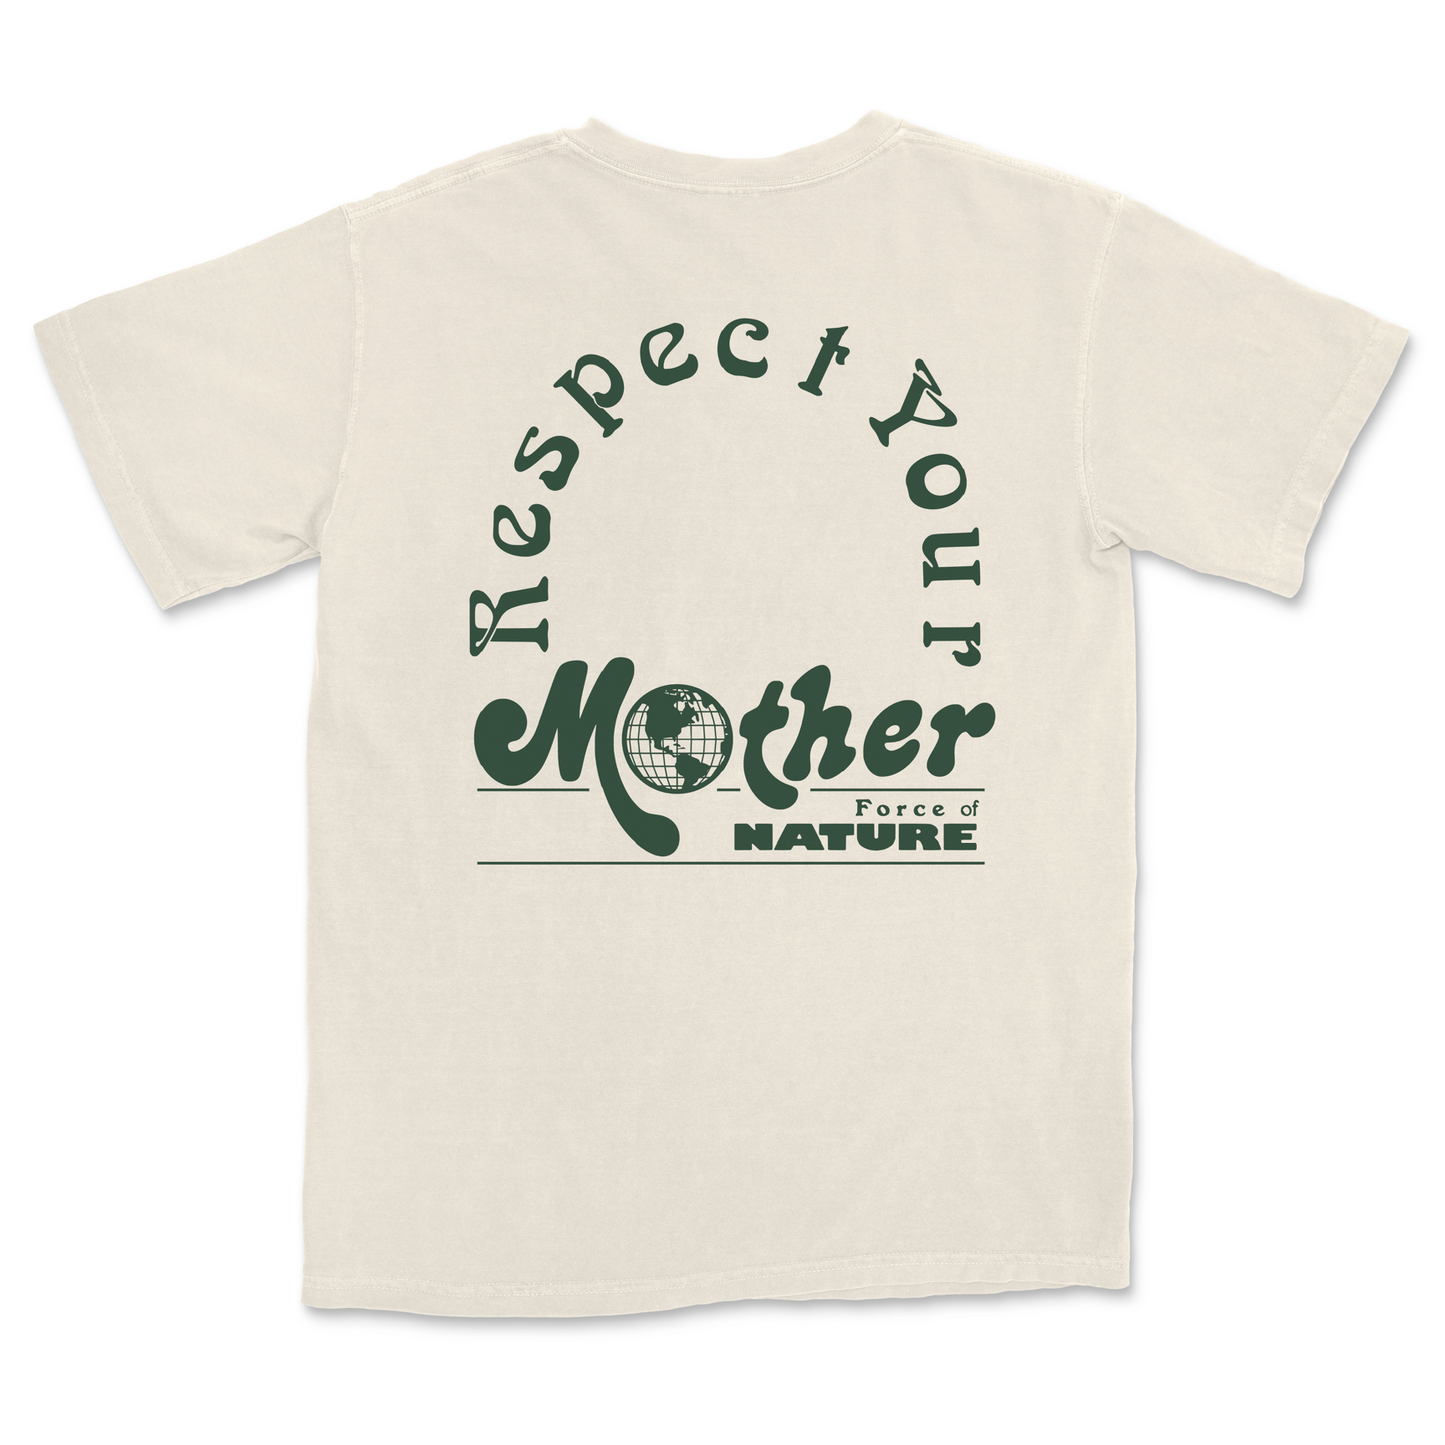 Respect your mother - Comfort Colors